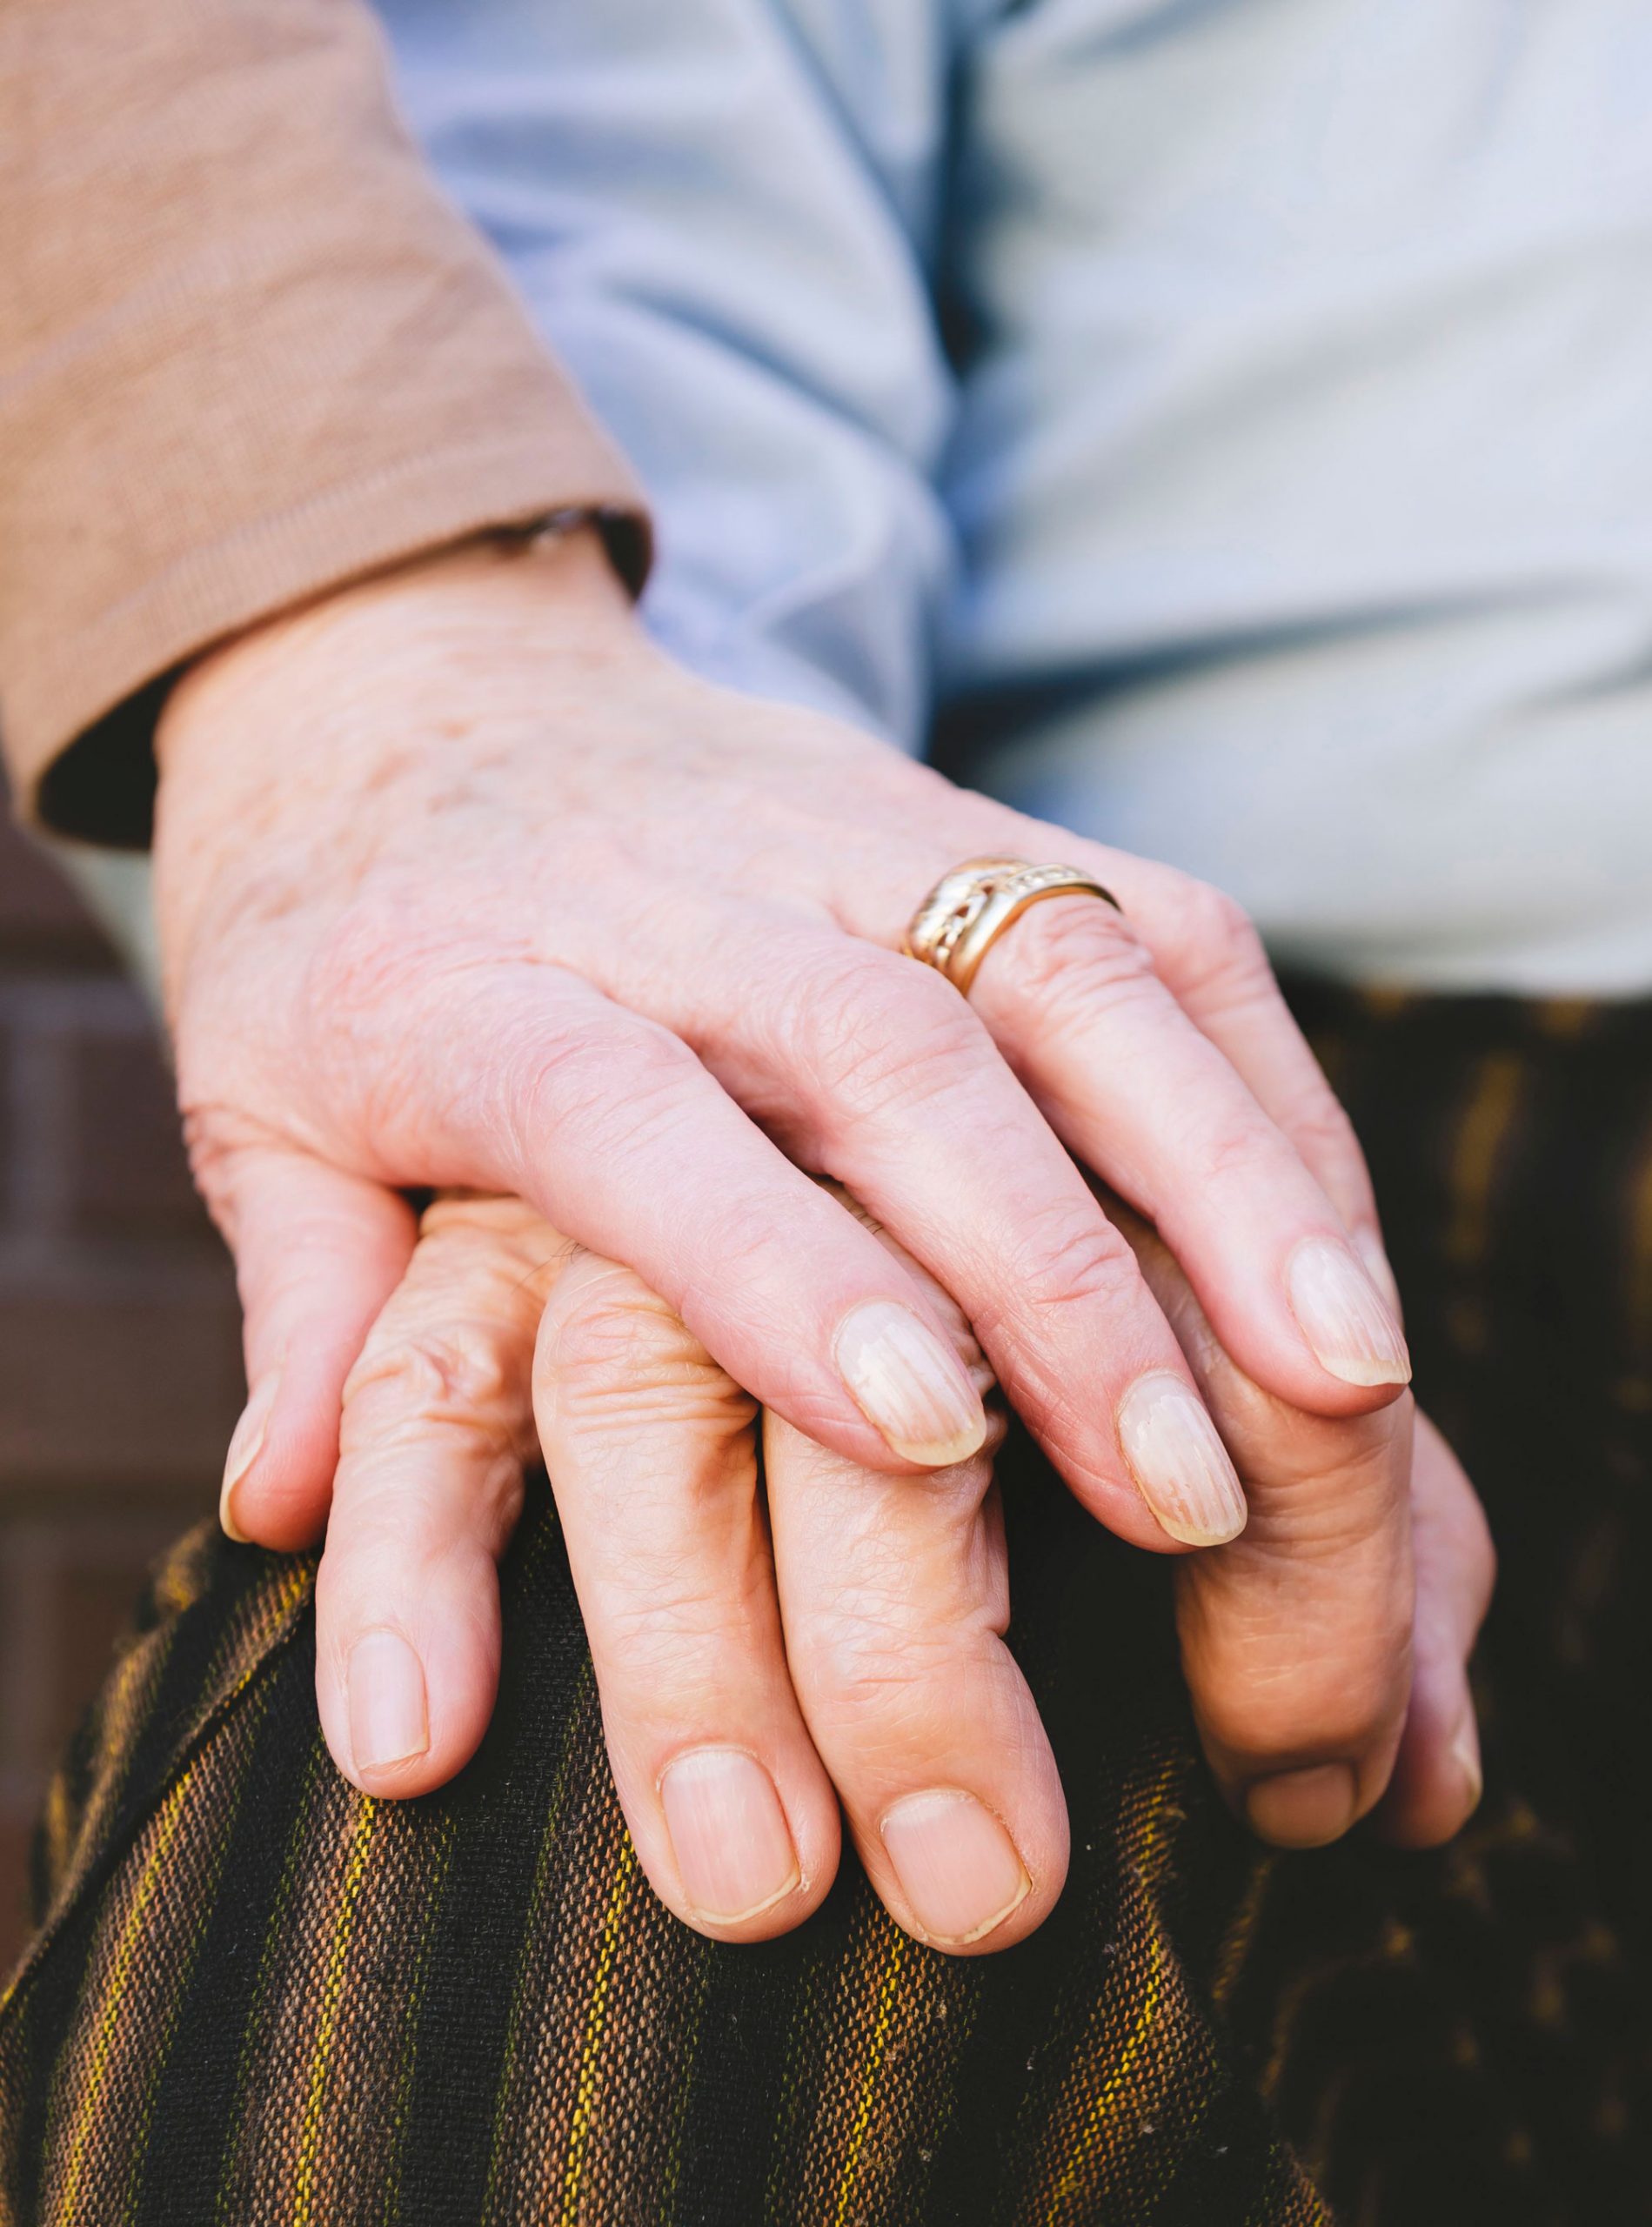 An 85-year-old man who romantically married a 65-year-old Girl